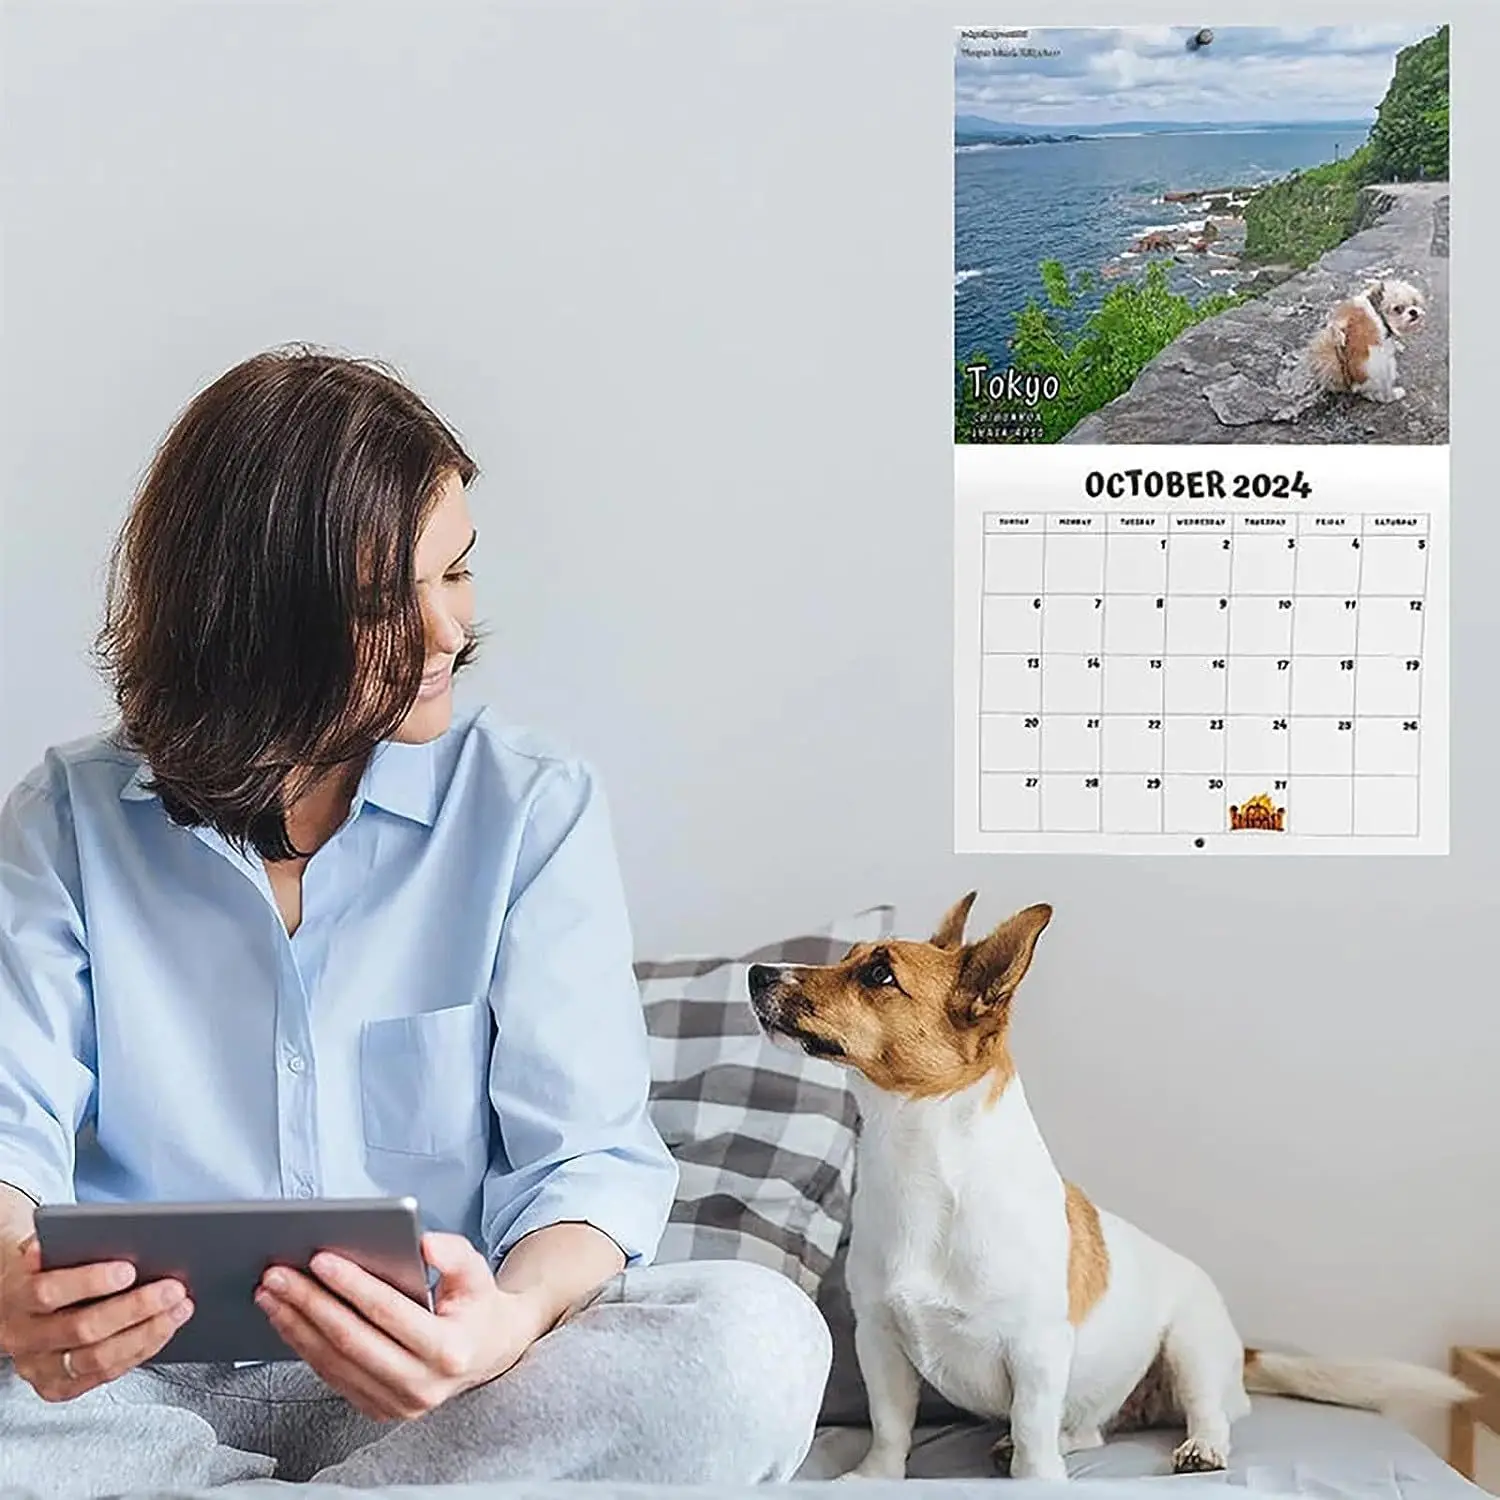 

Funny Dog Pooping Monthly Wall Calendar 2024 New Year Unique Calendar Gift for Friends Family Neighbors Home Decoration